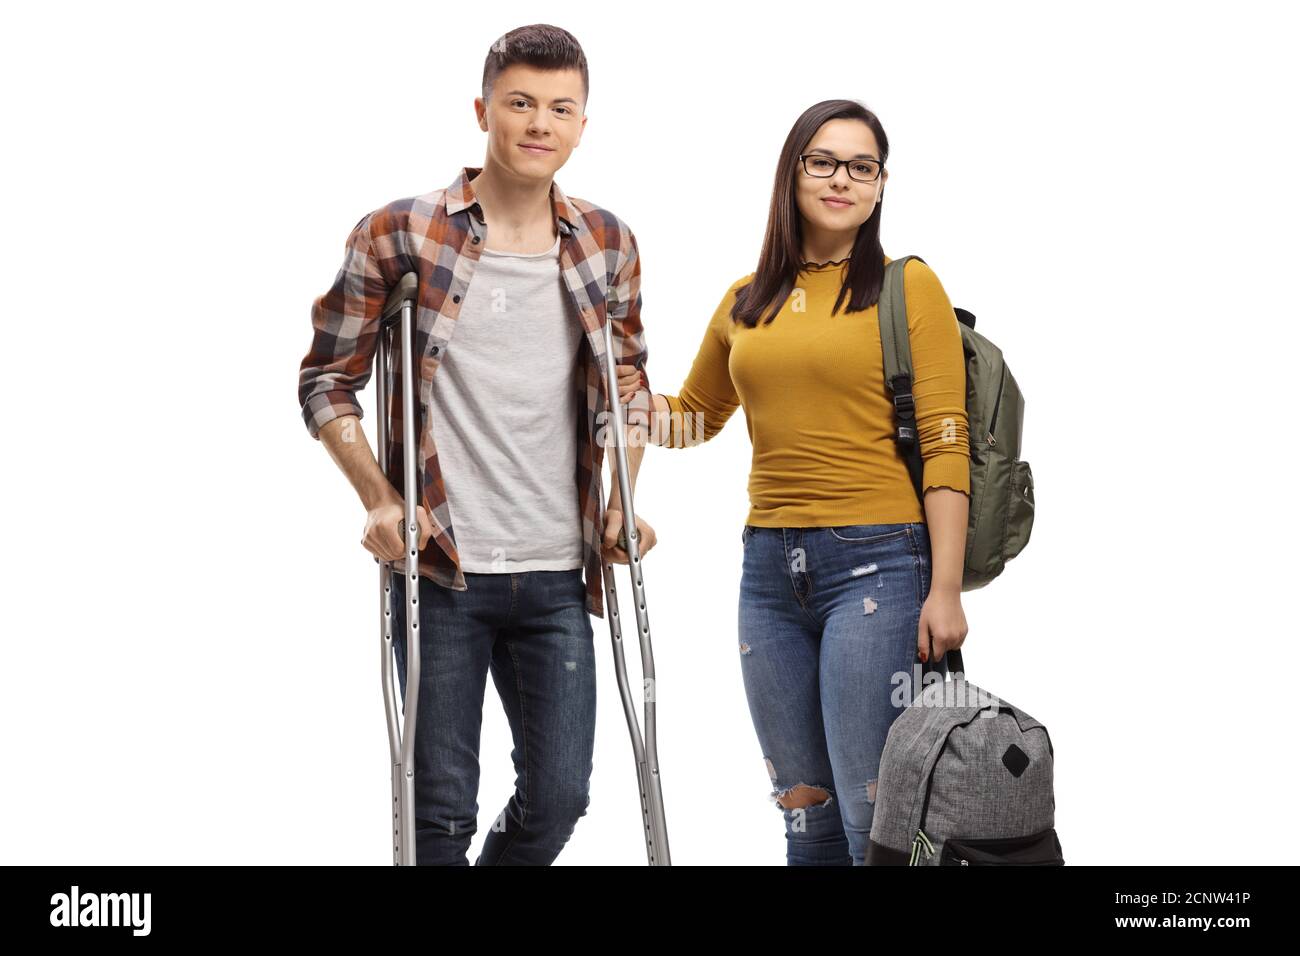 Male student with crutches and a female student helping him isolated on white background Stock Photo